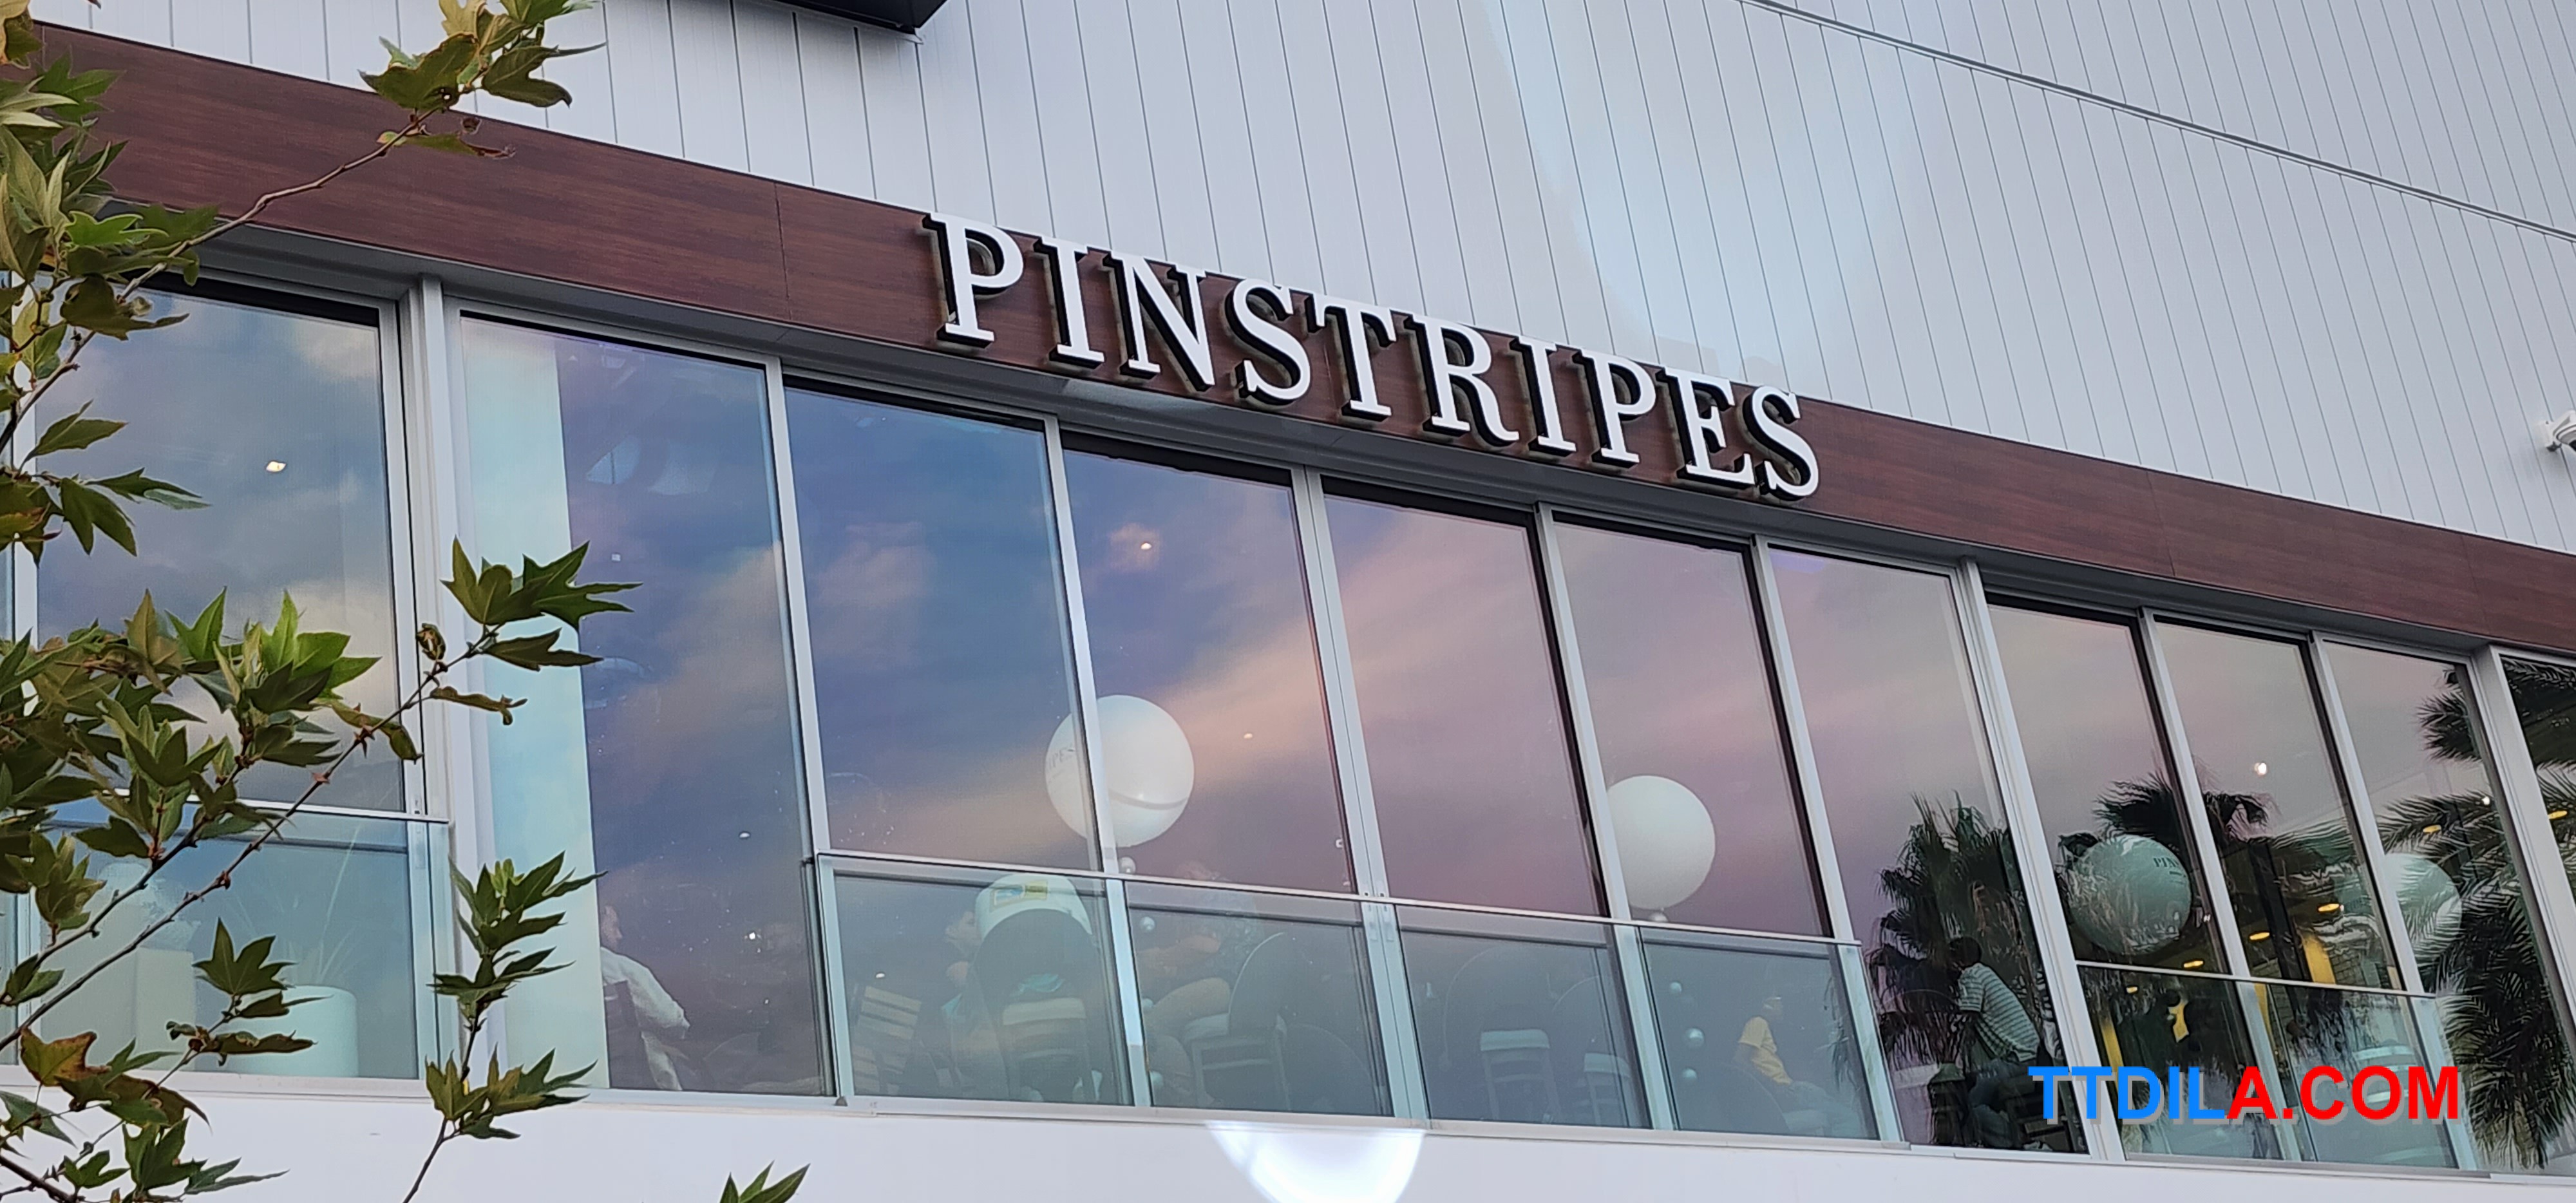 Pinstripes bowling alley opens at Westfield Topanga - L.A. Business